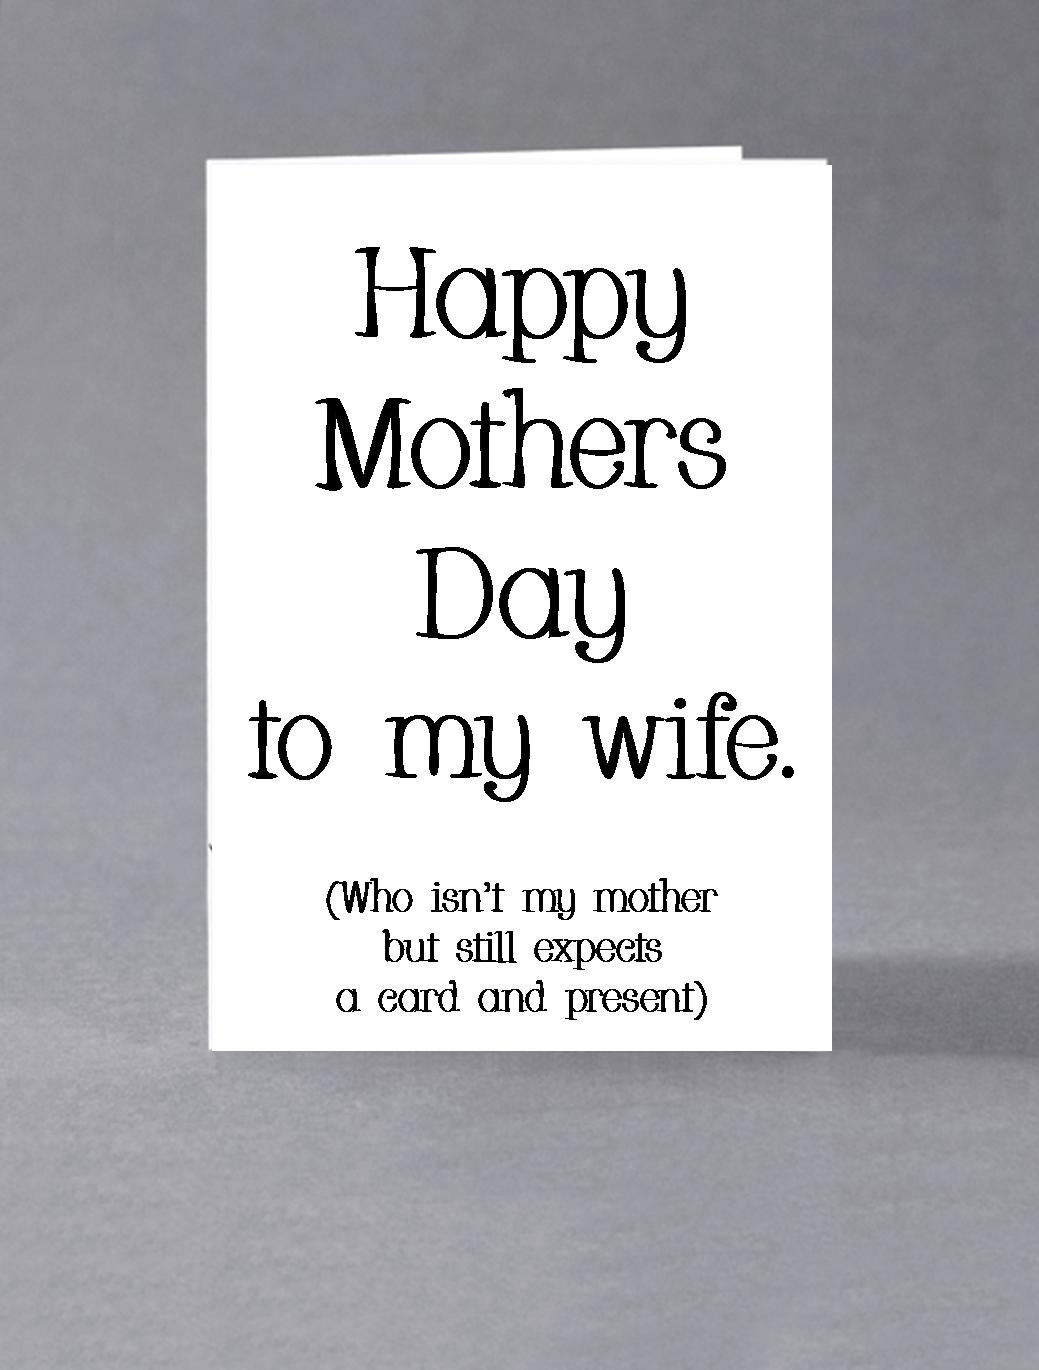 Funny Mothers Day Cards For Grandma Mothers Card Funny Happy Sarcastic Mother 